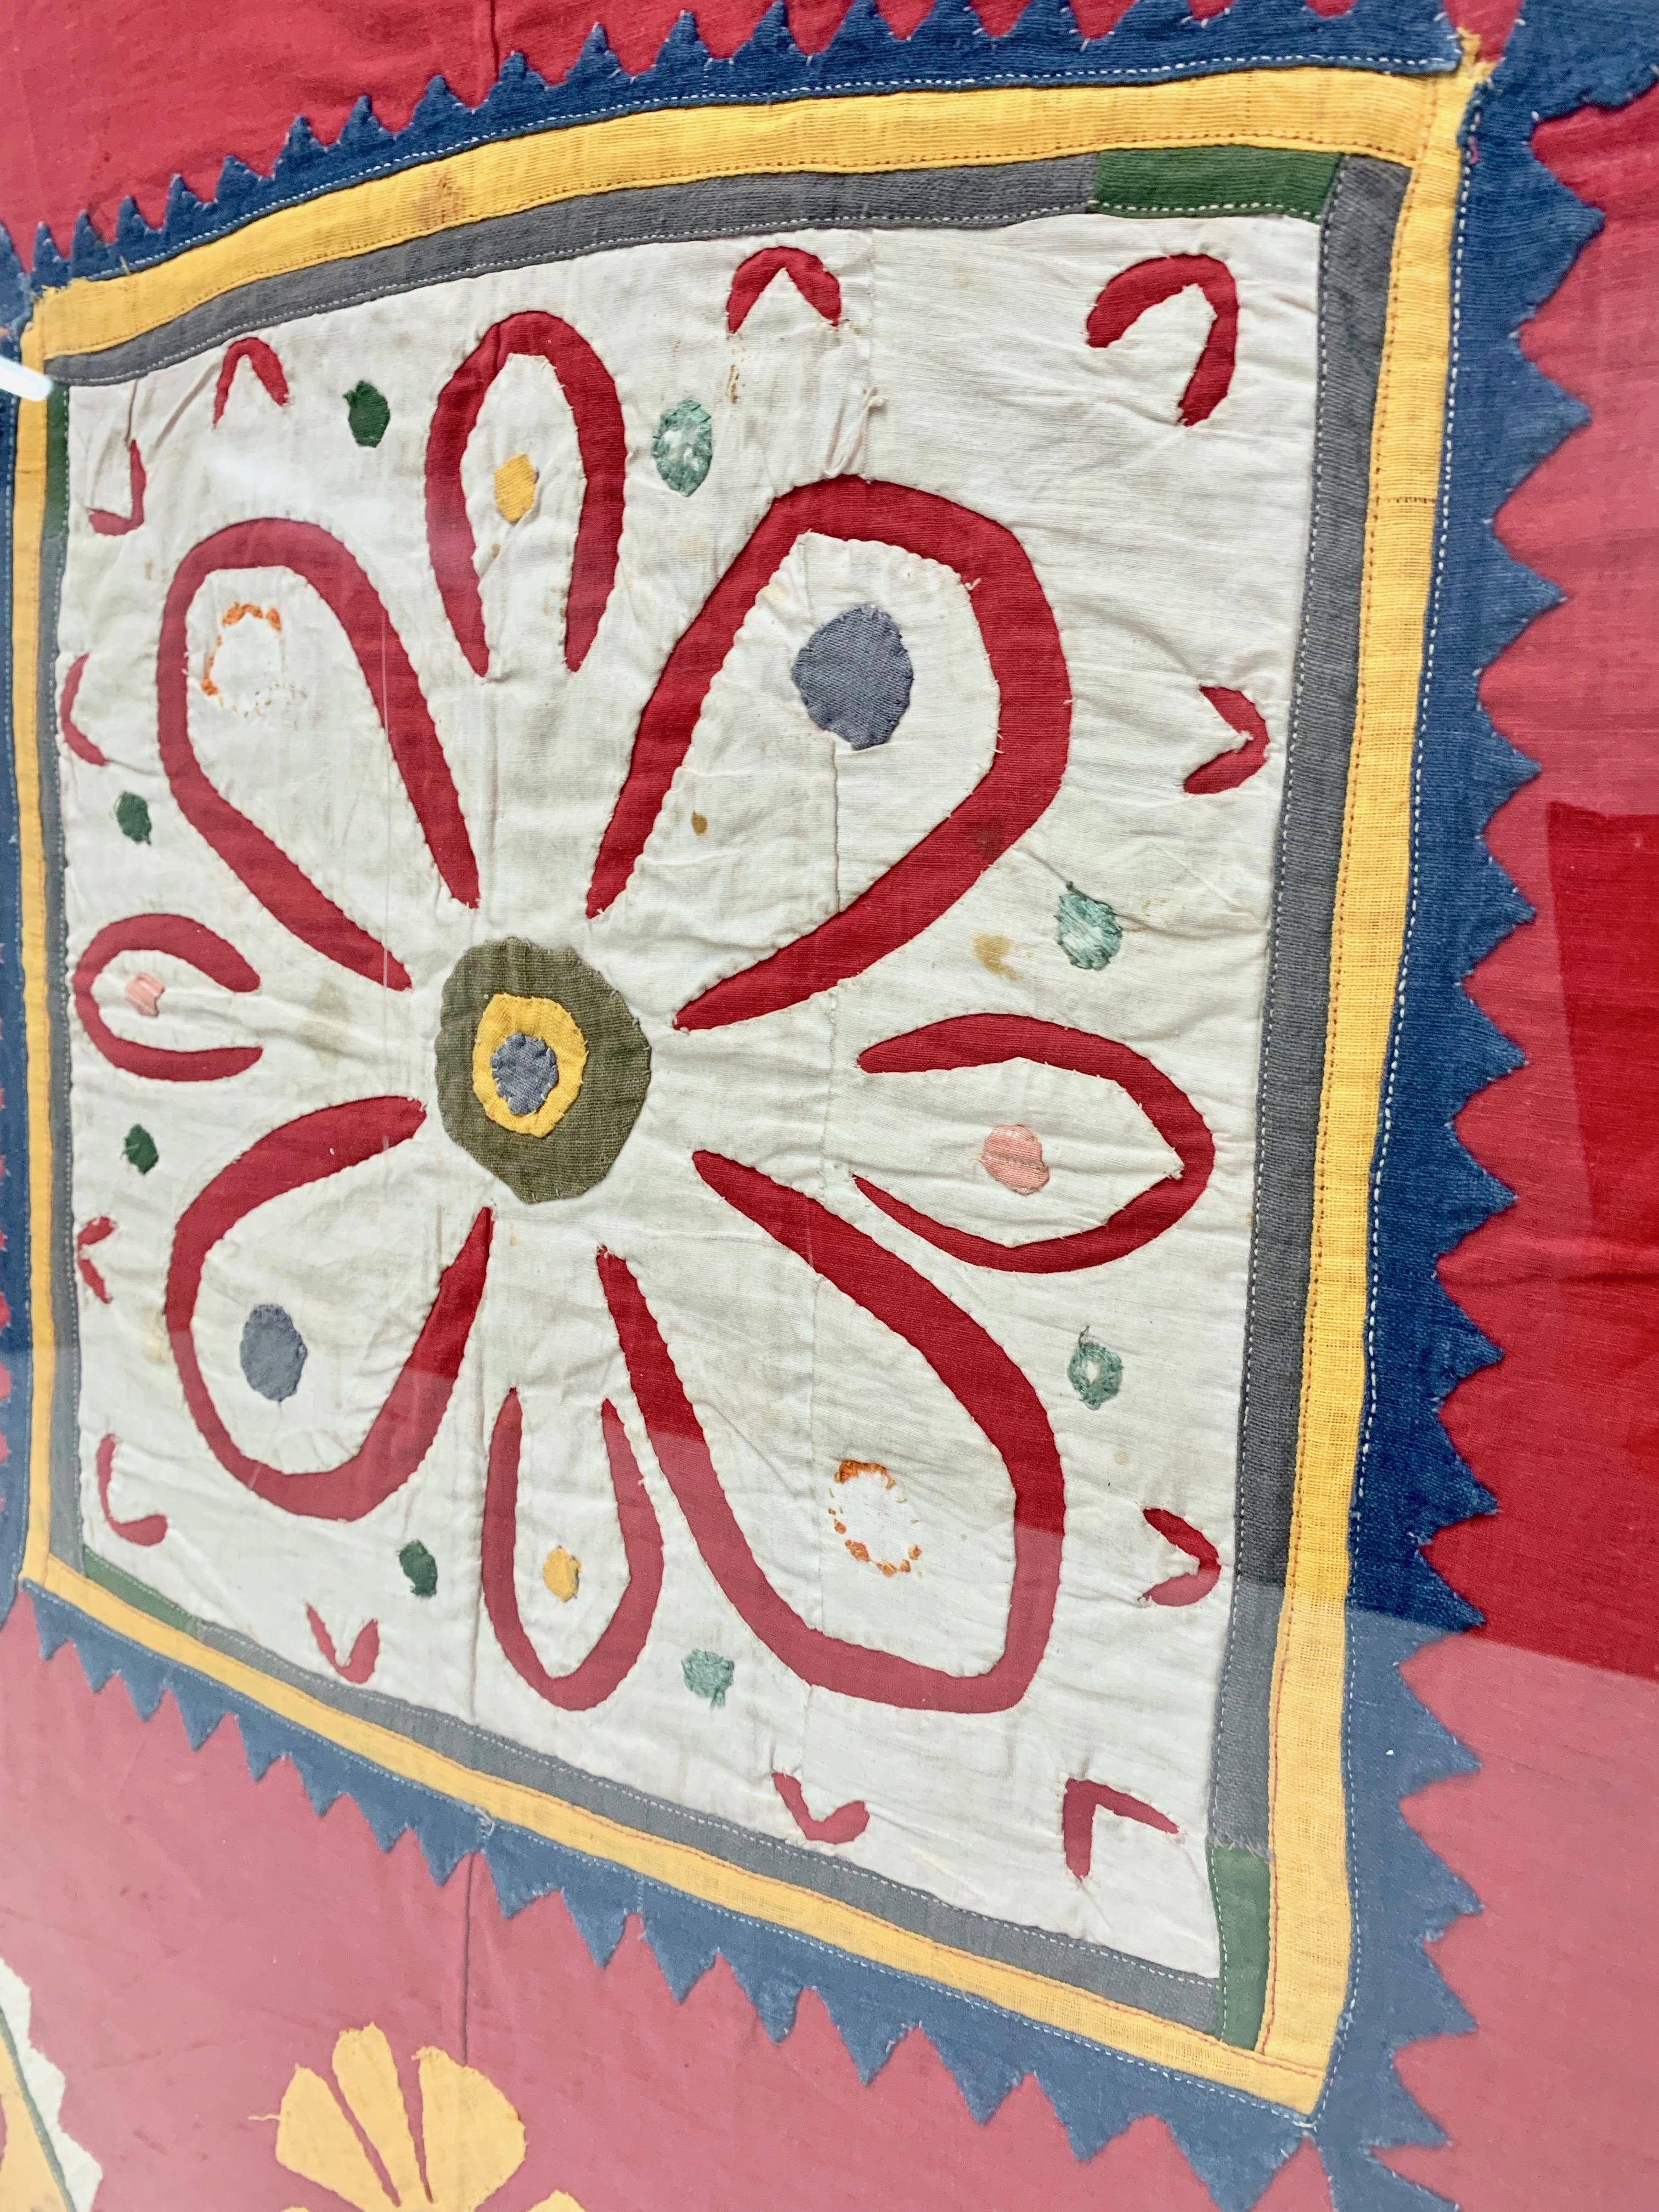 Antique hand embroidered textile from India Framed, hand embroidered with bright vivid colors and mirrored details, nature themes. Rajasthan Folk Art, these textiles were used for wedding lush seating cushions. You have to see close up details of